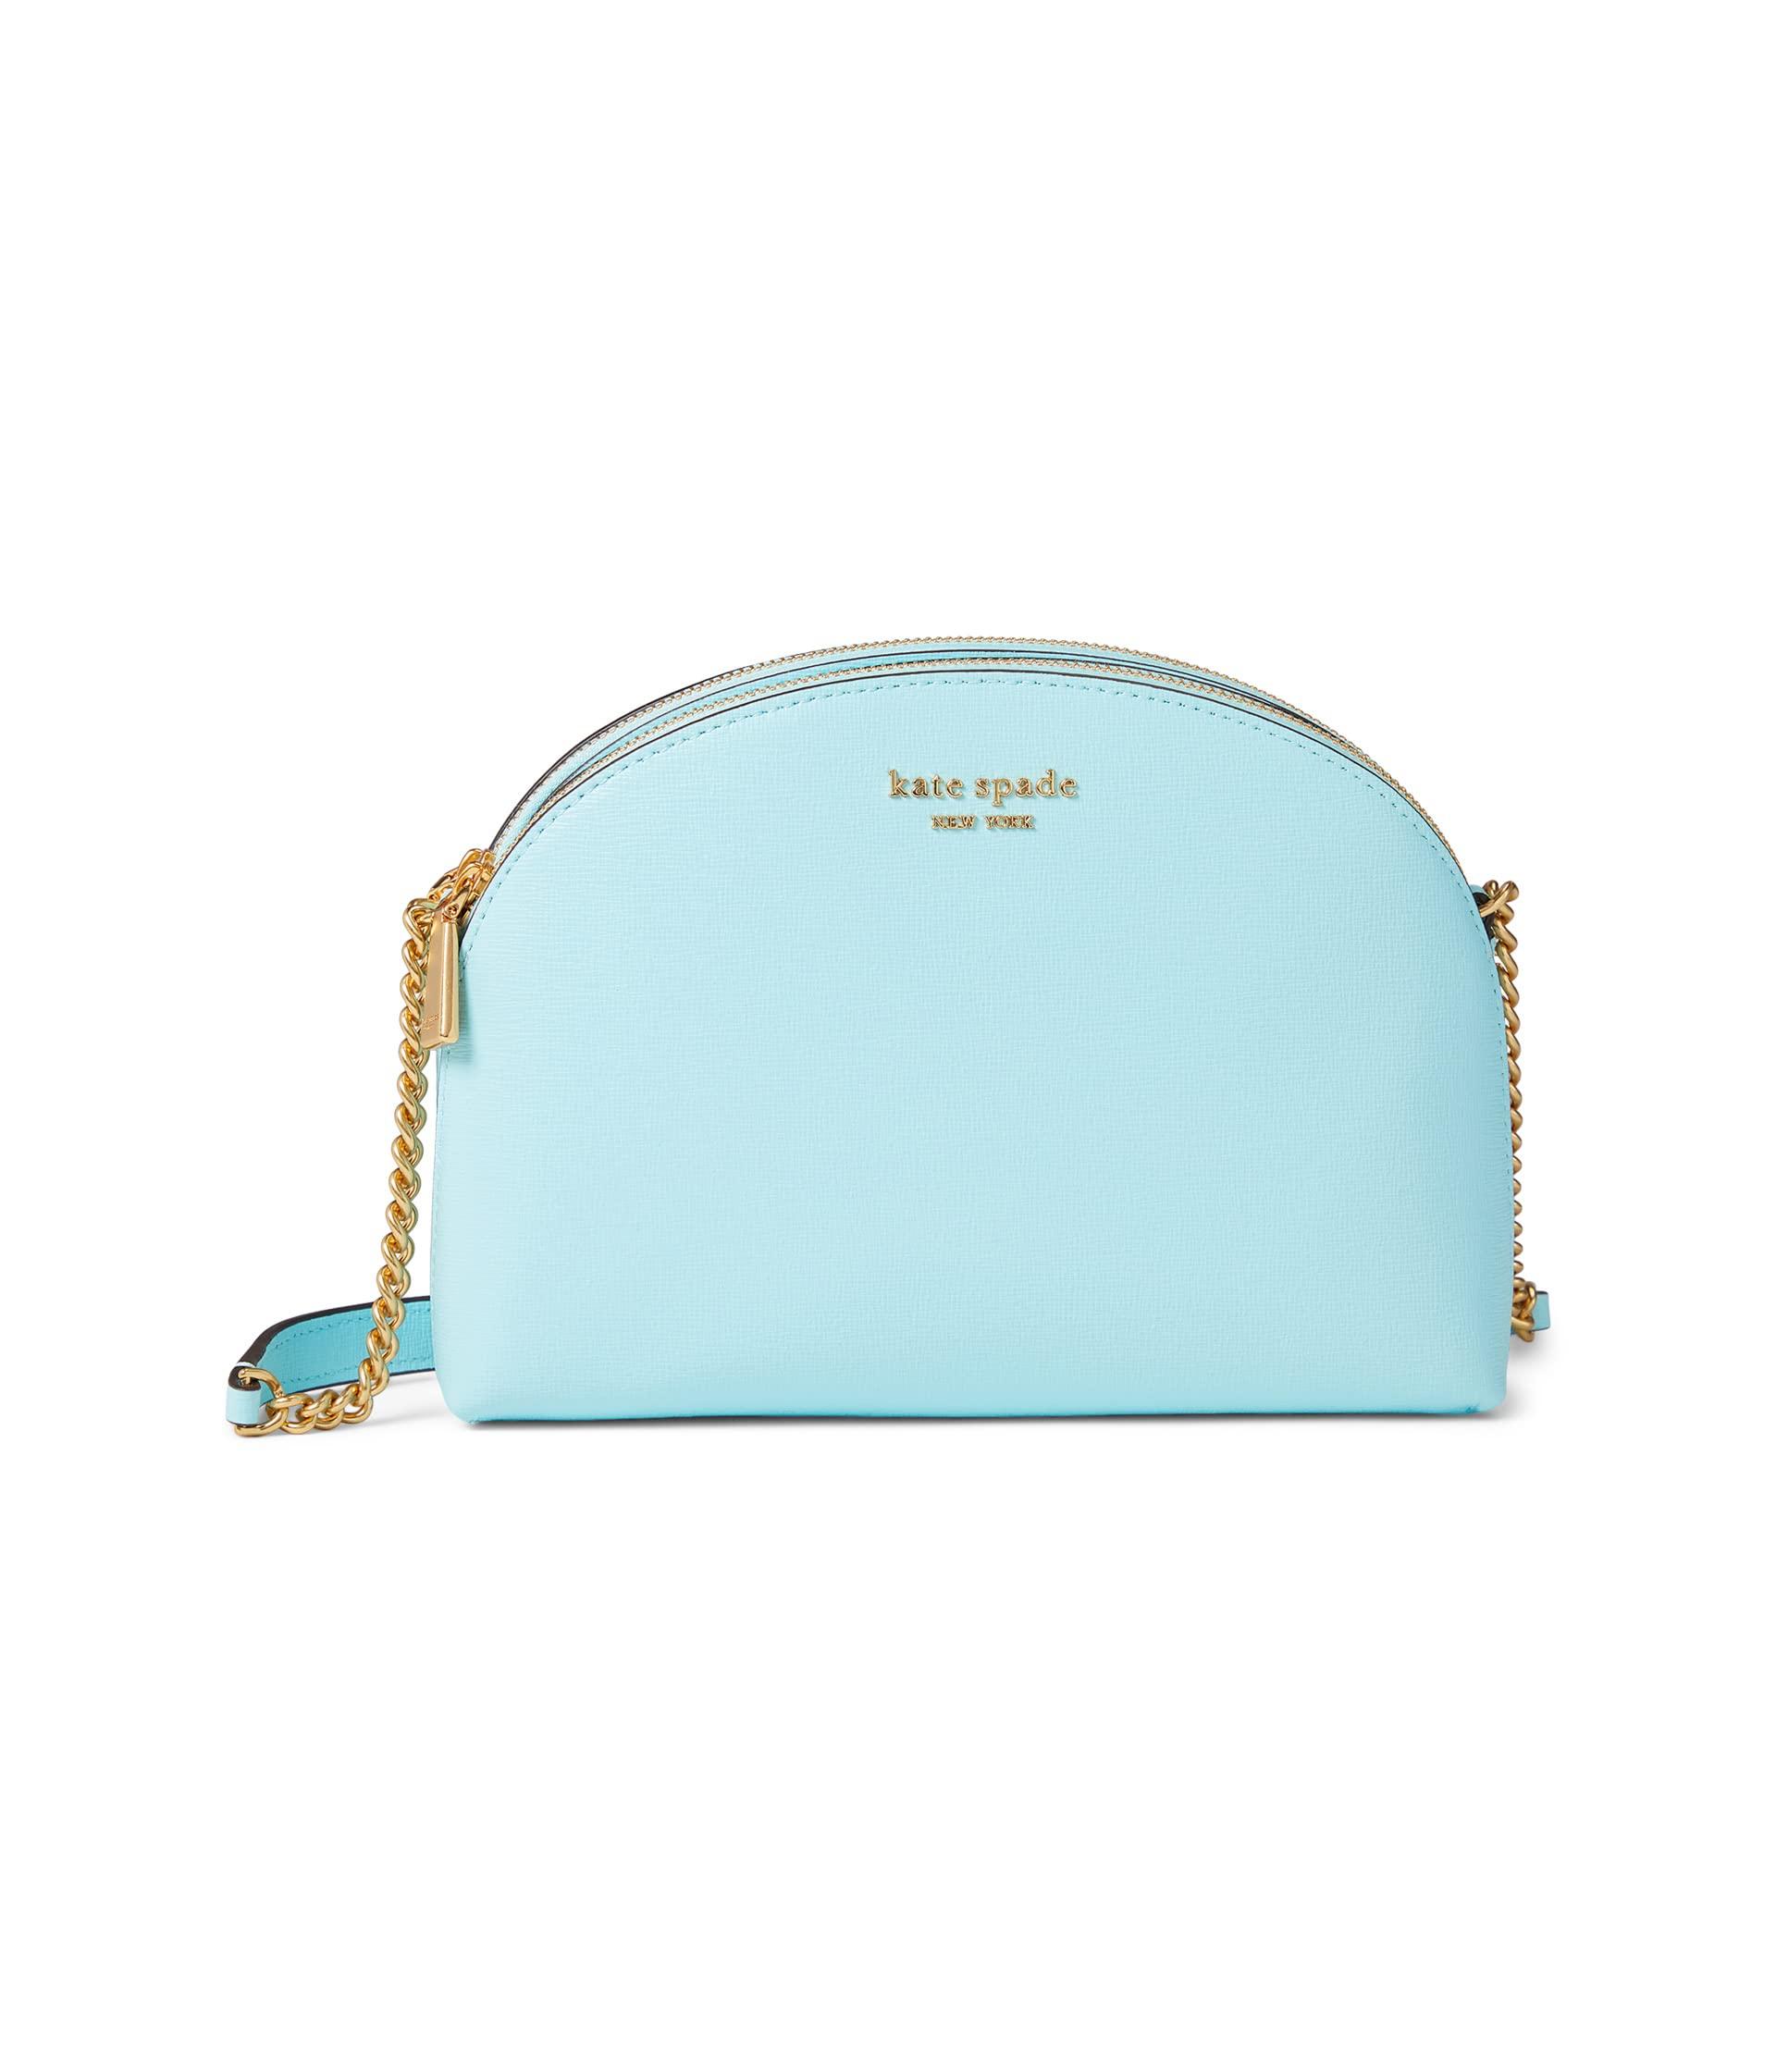 Kate Spade Morgan Saffiano Leather Double Zip Dome Crossbody in Blue | Lyst